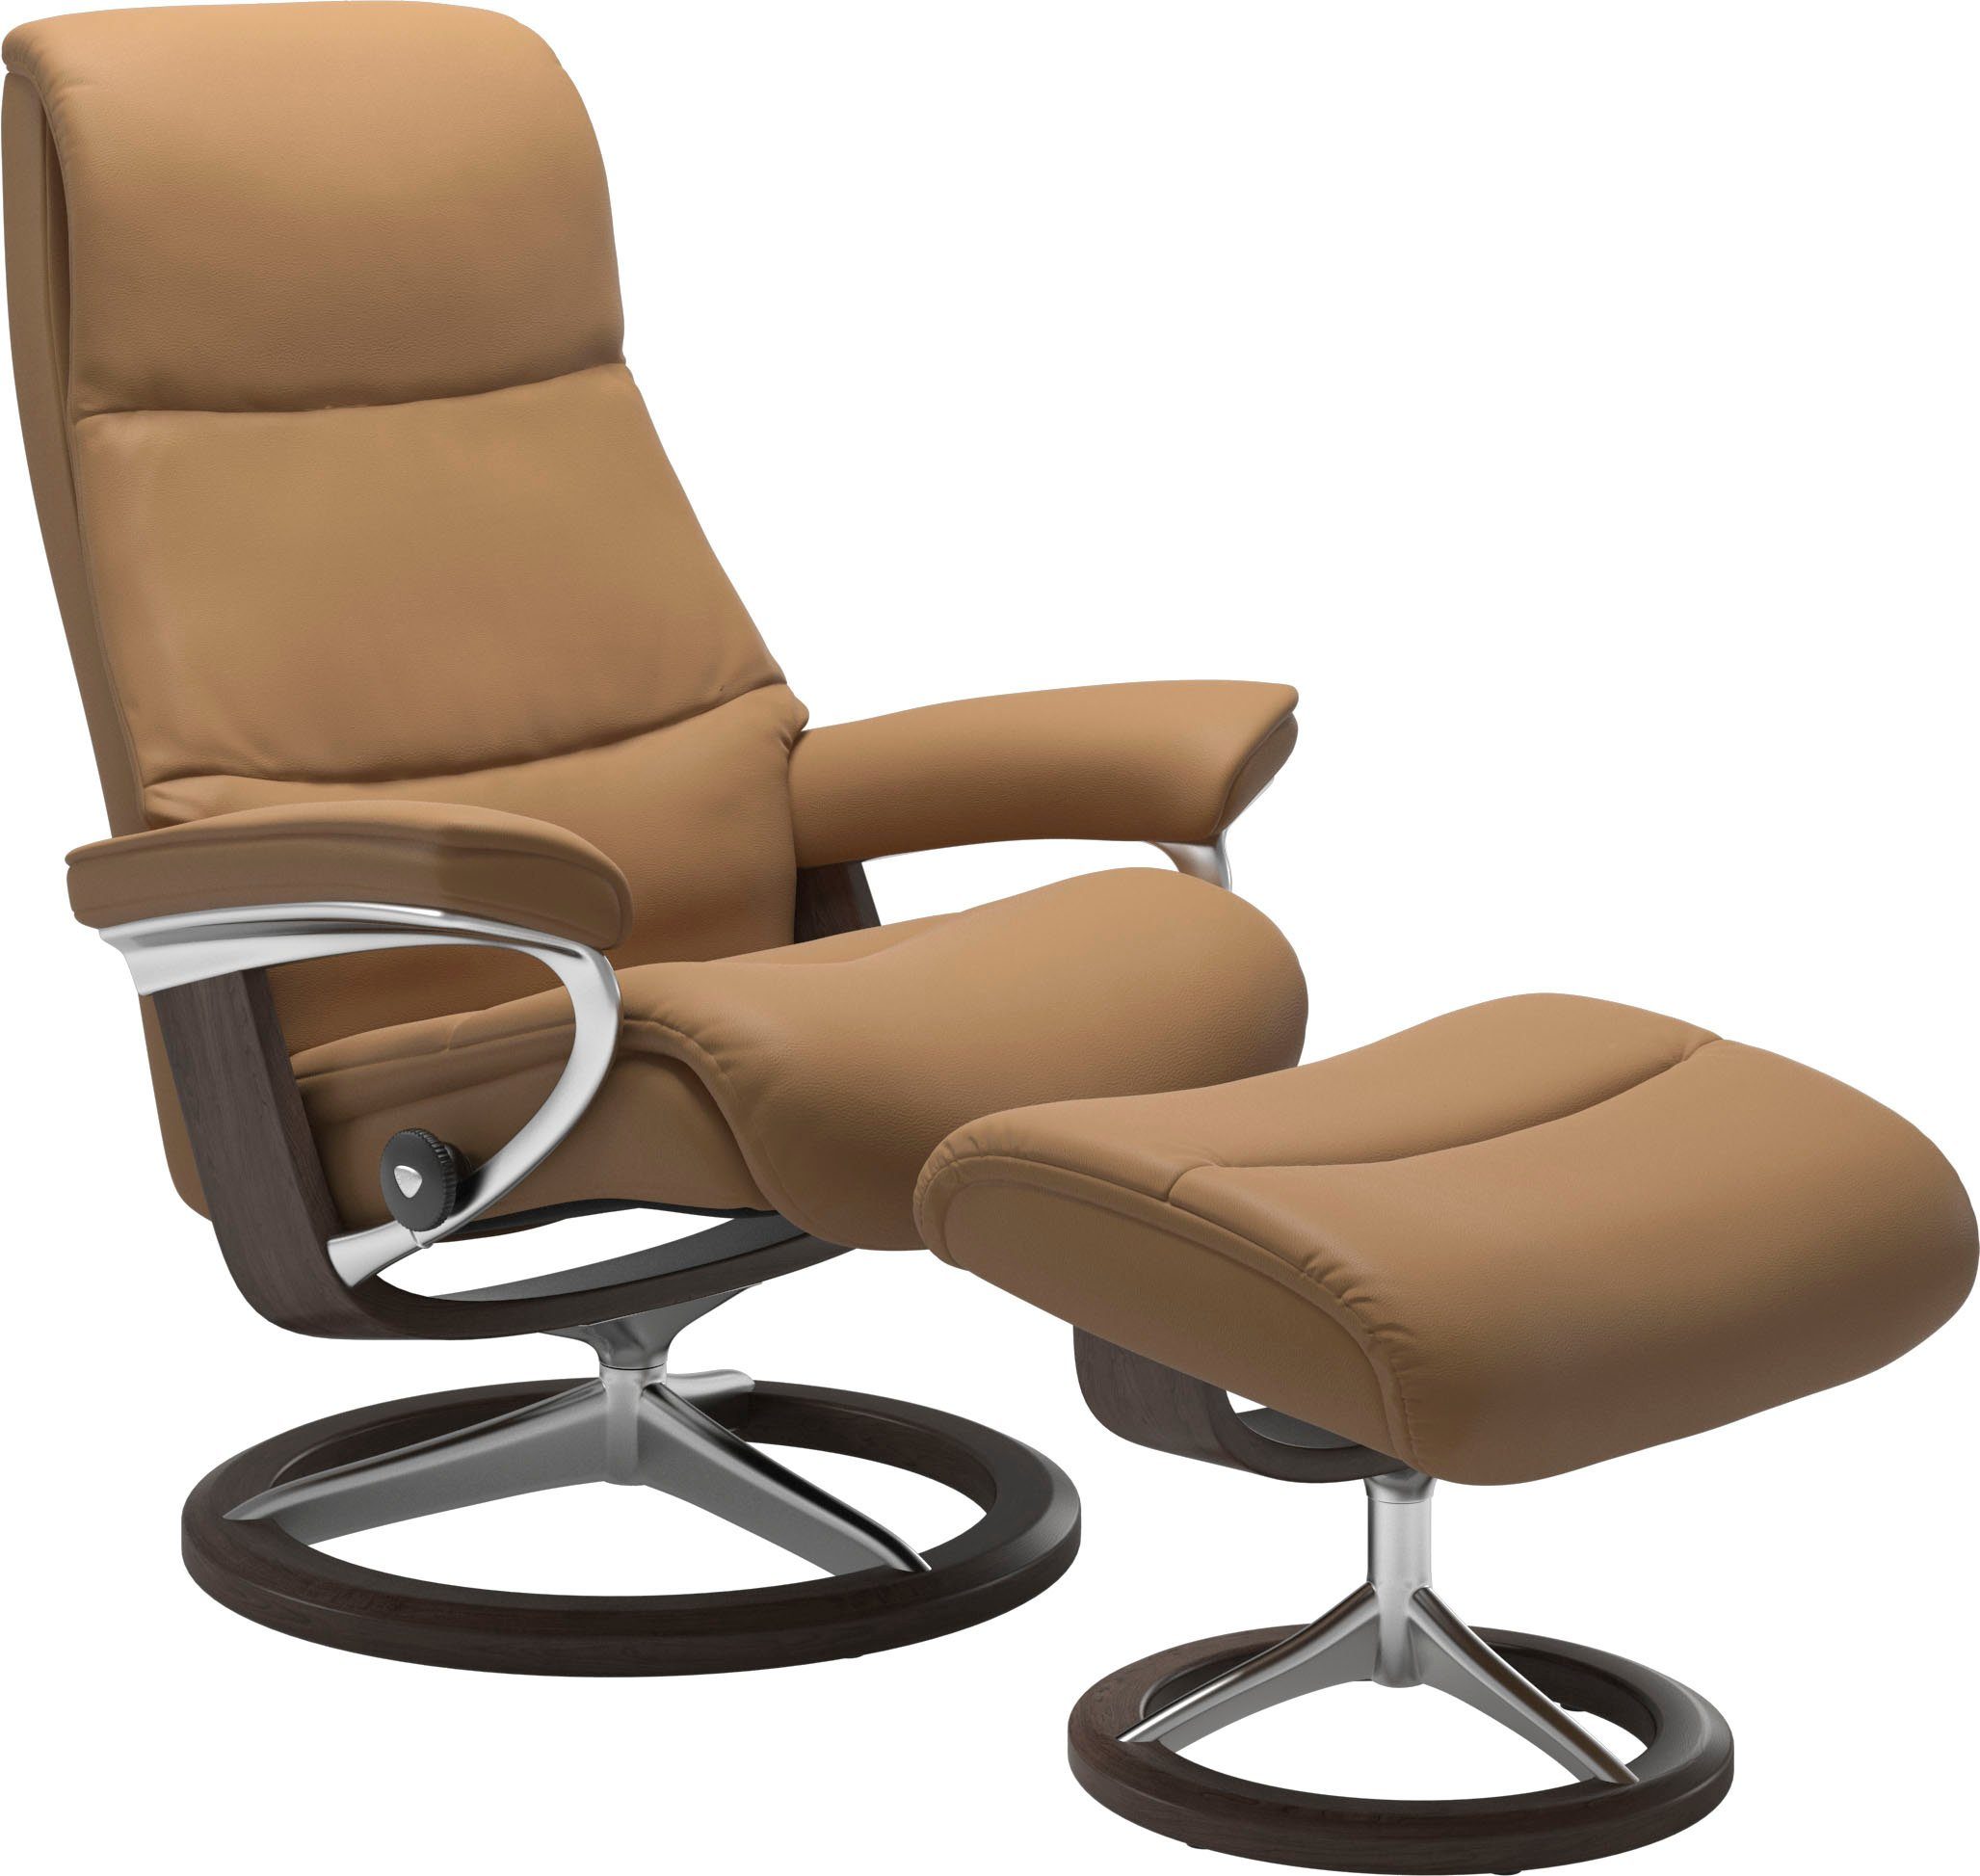 Größe Wenge View, Signature mit L,Gestell Base, Stressless® Relaxsessel